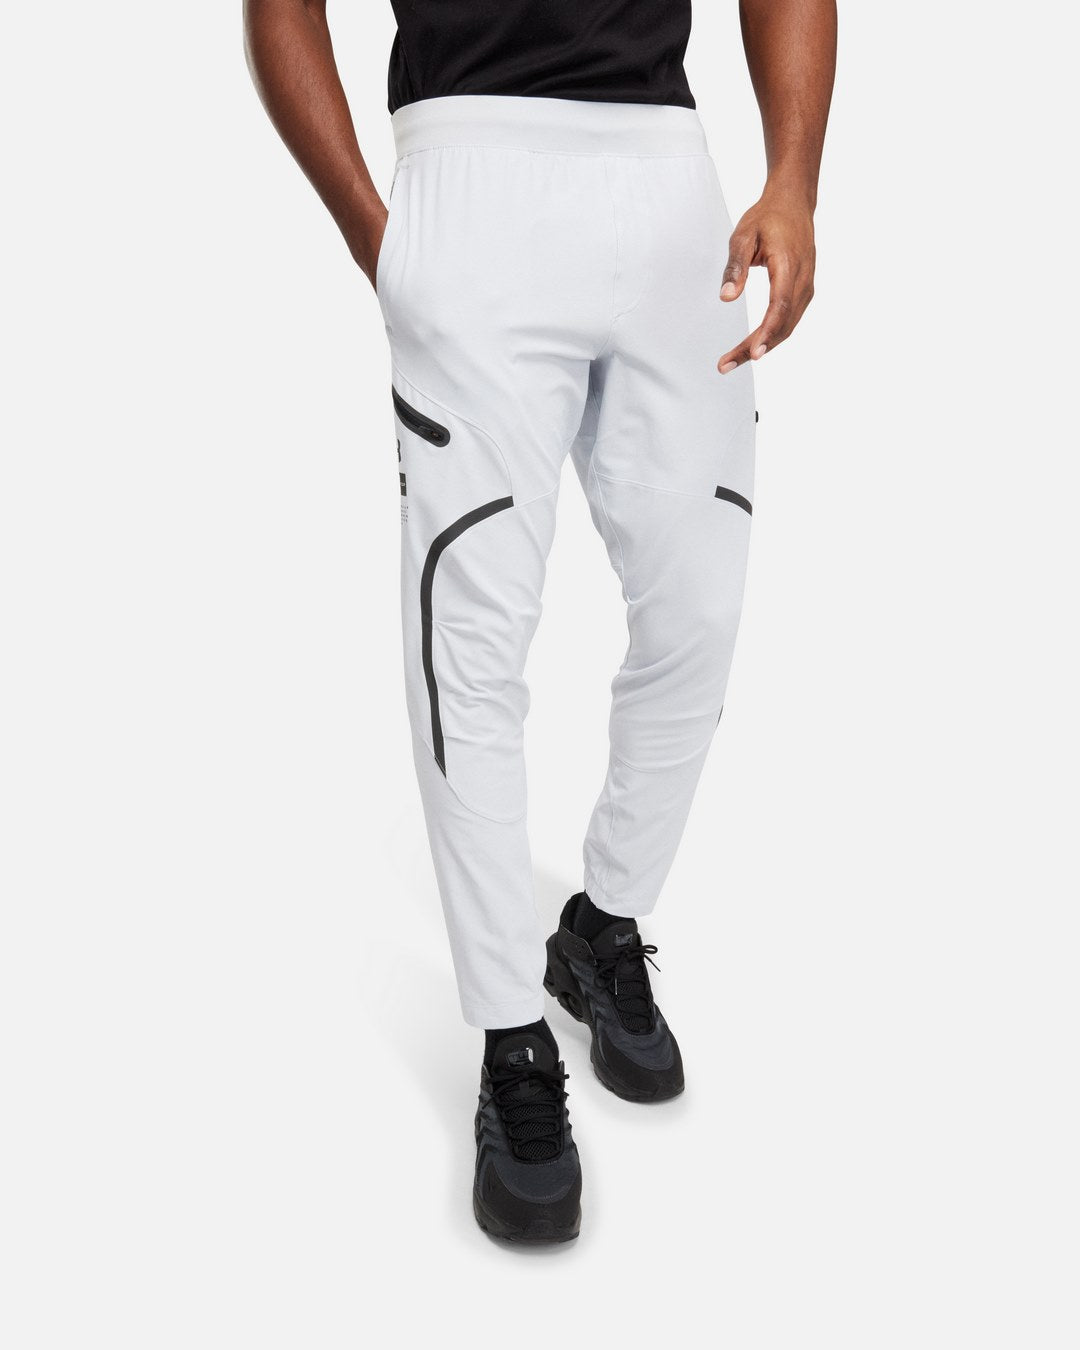 Under Armor Unstoppable Cargo Pants - Grey/Black